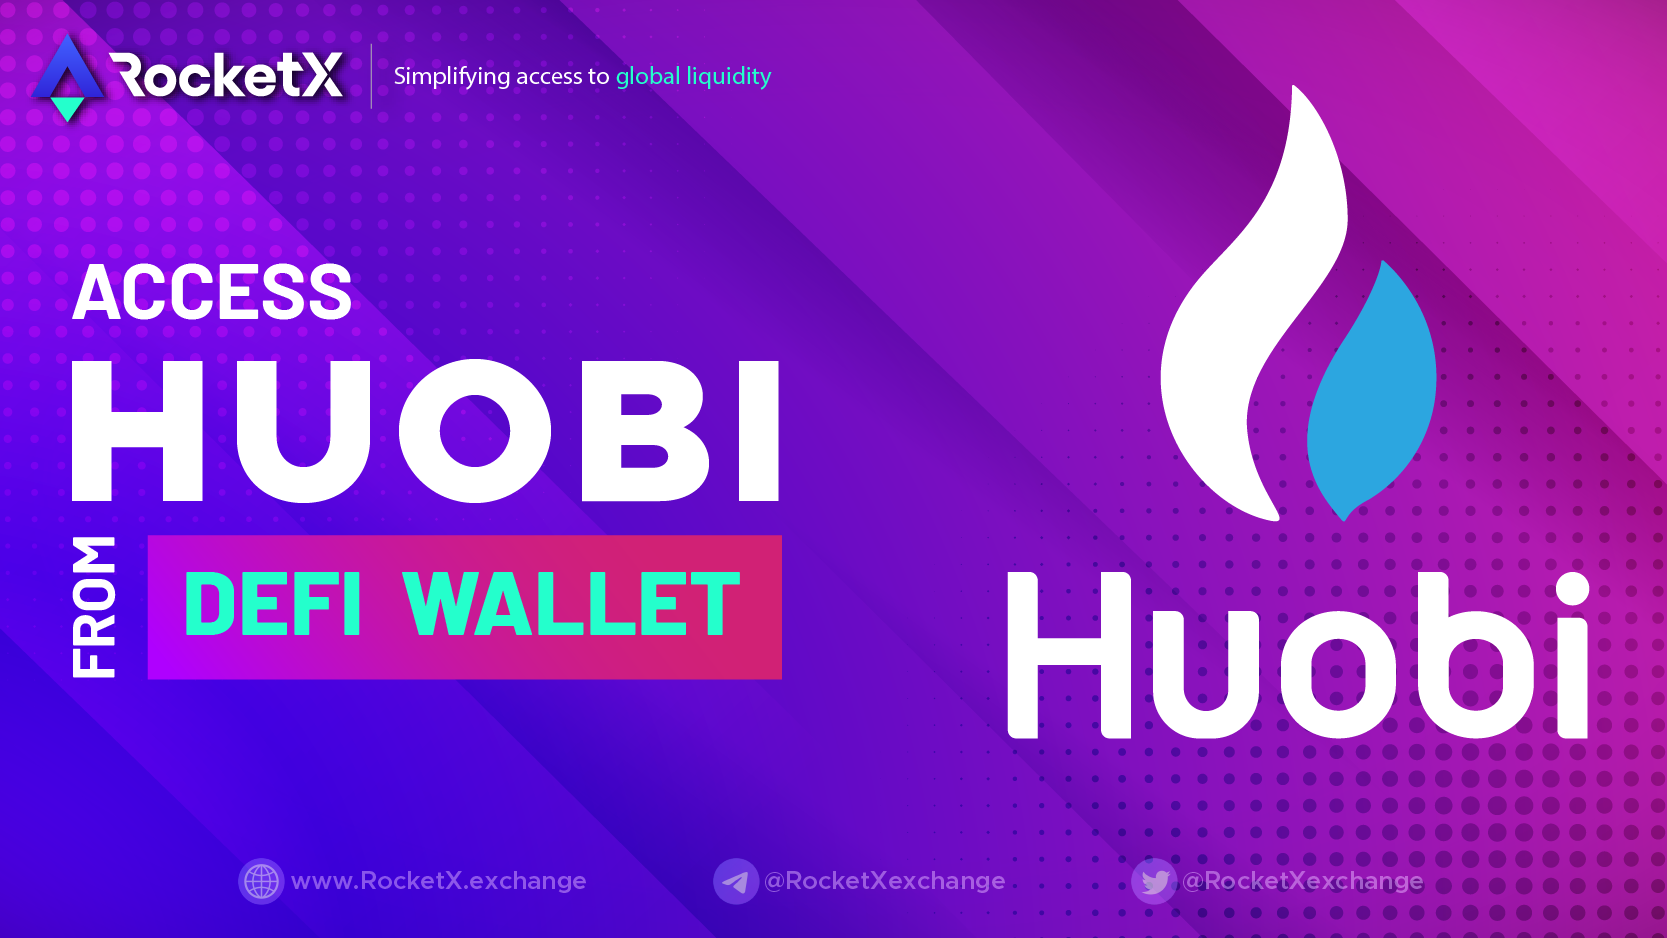 Benefits of Huobi Integration to RocketX, for the Crypto Traders